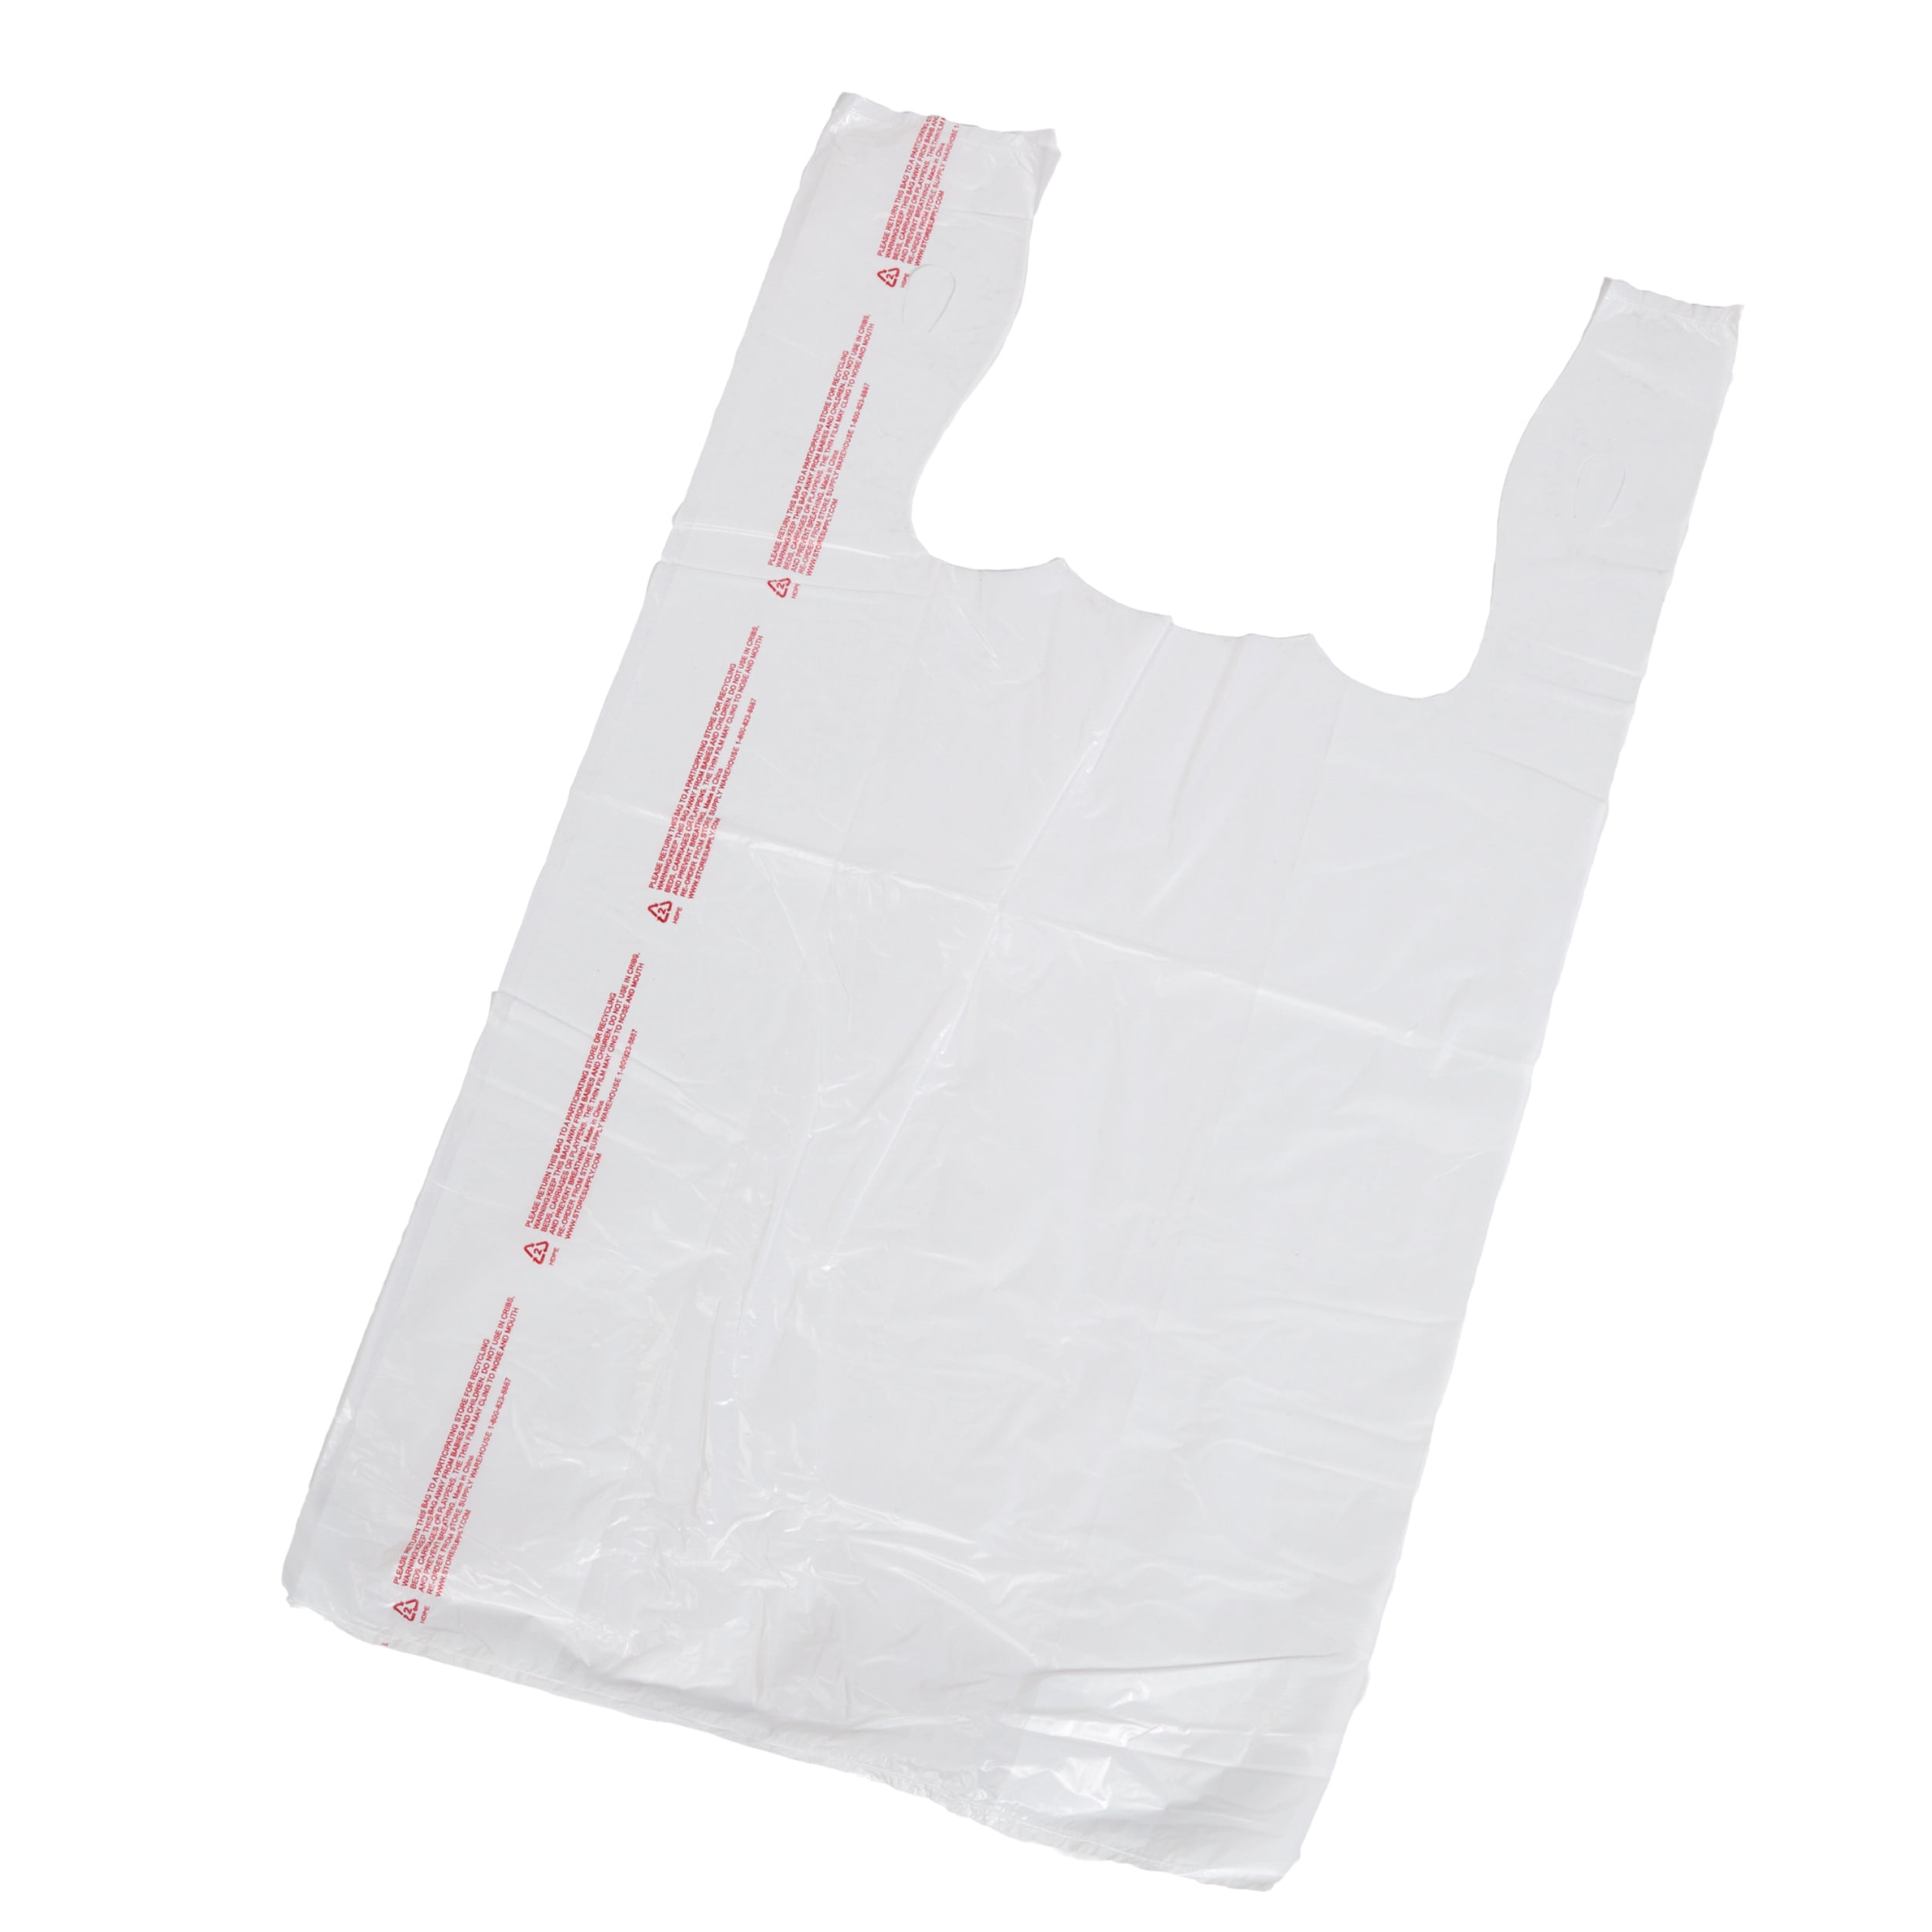 EcoQuality Plastic White Thank You T-Shirt Bags 400ct, 1/6 Shopping Bags, Grocery Bags, Poly Bags, Multi-Use, Medium size, Reusable Carry Out Bags (22